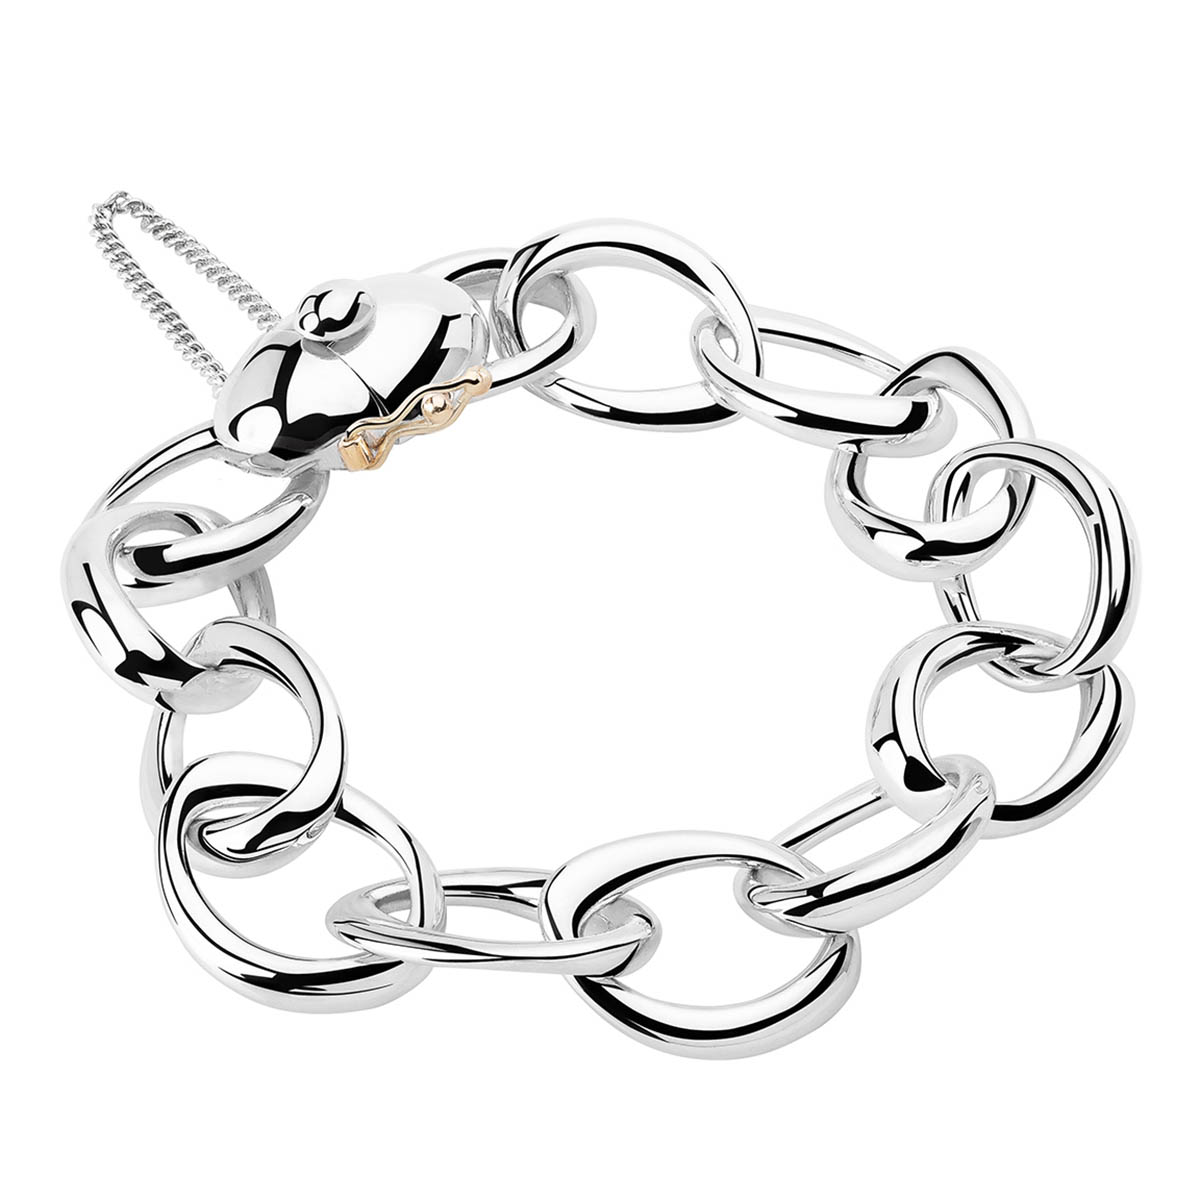 Tane Michelle Sterling Silver Large Oval Link Chain Bracelet, 7.4 ...